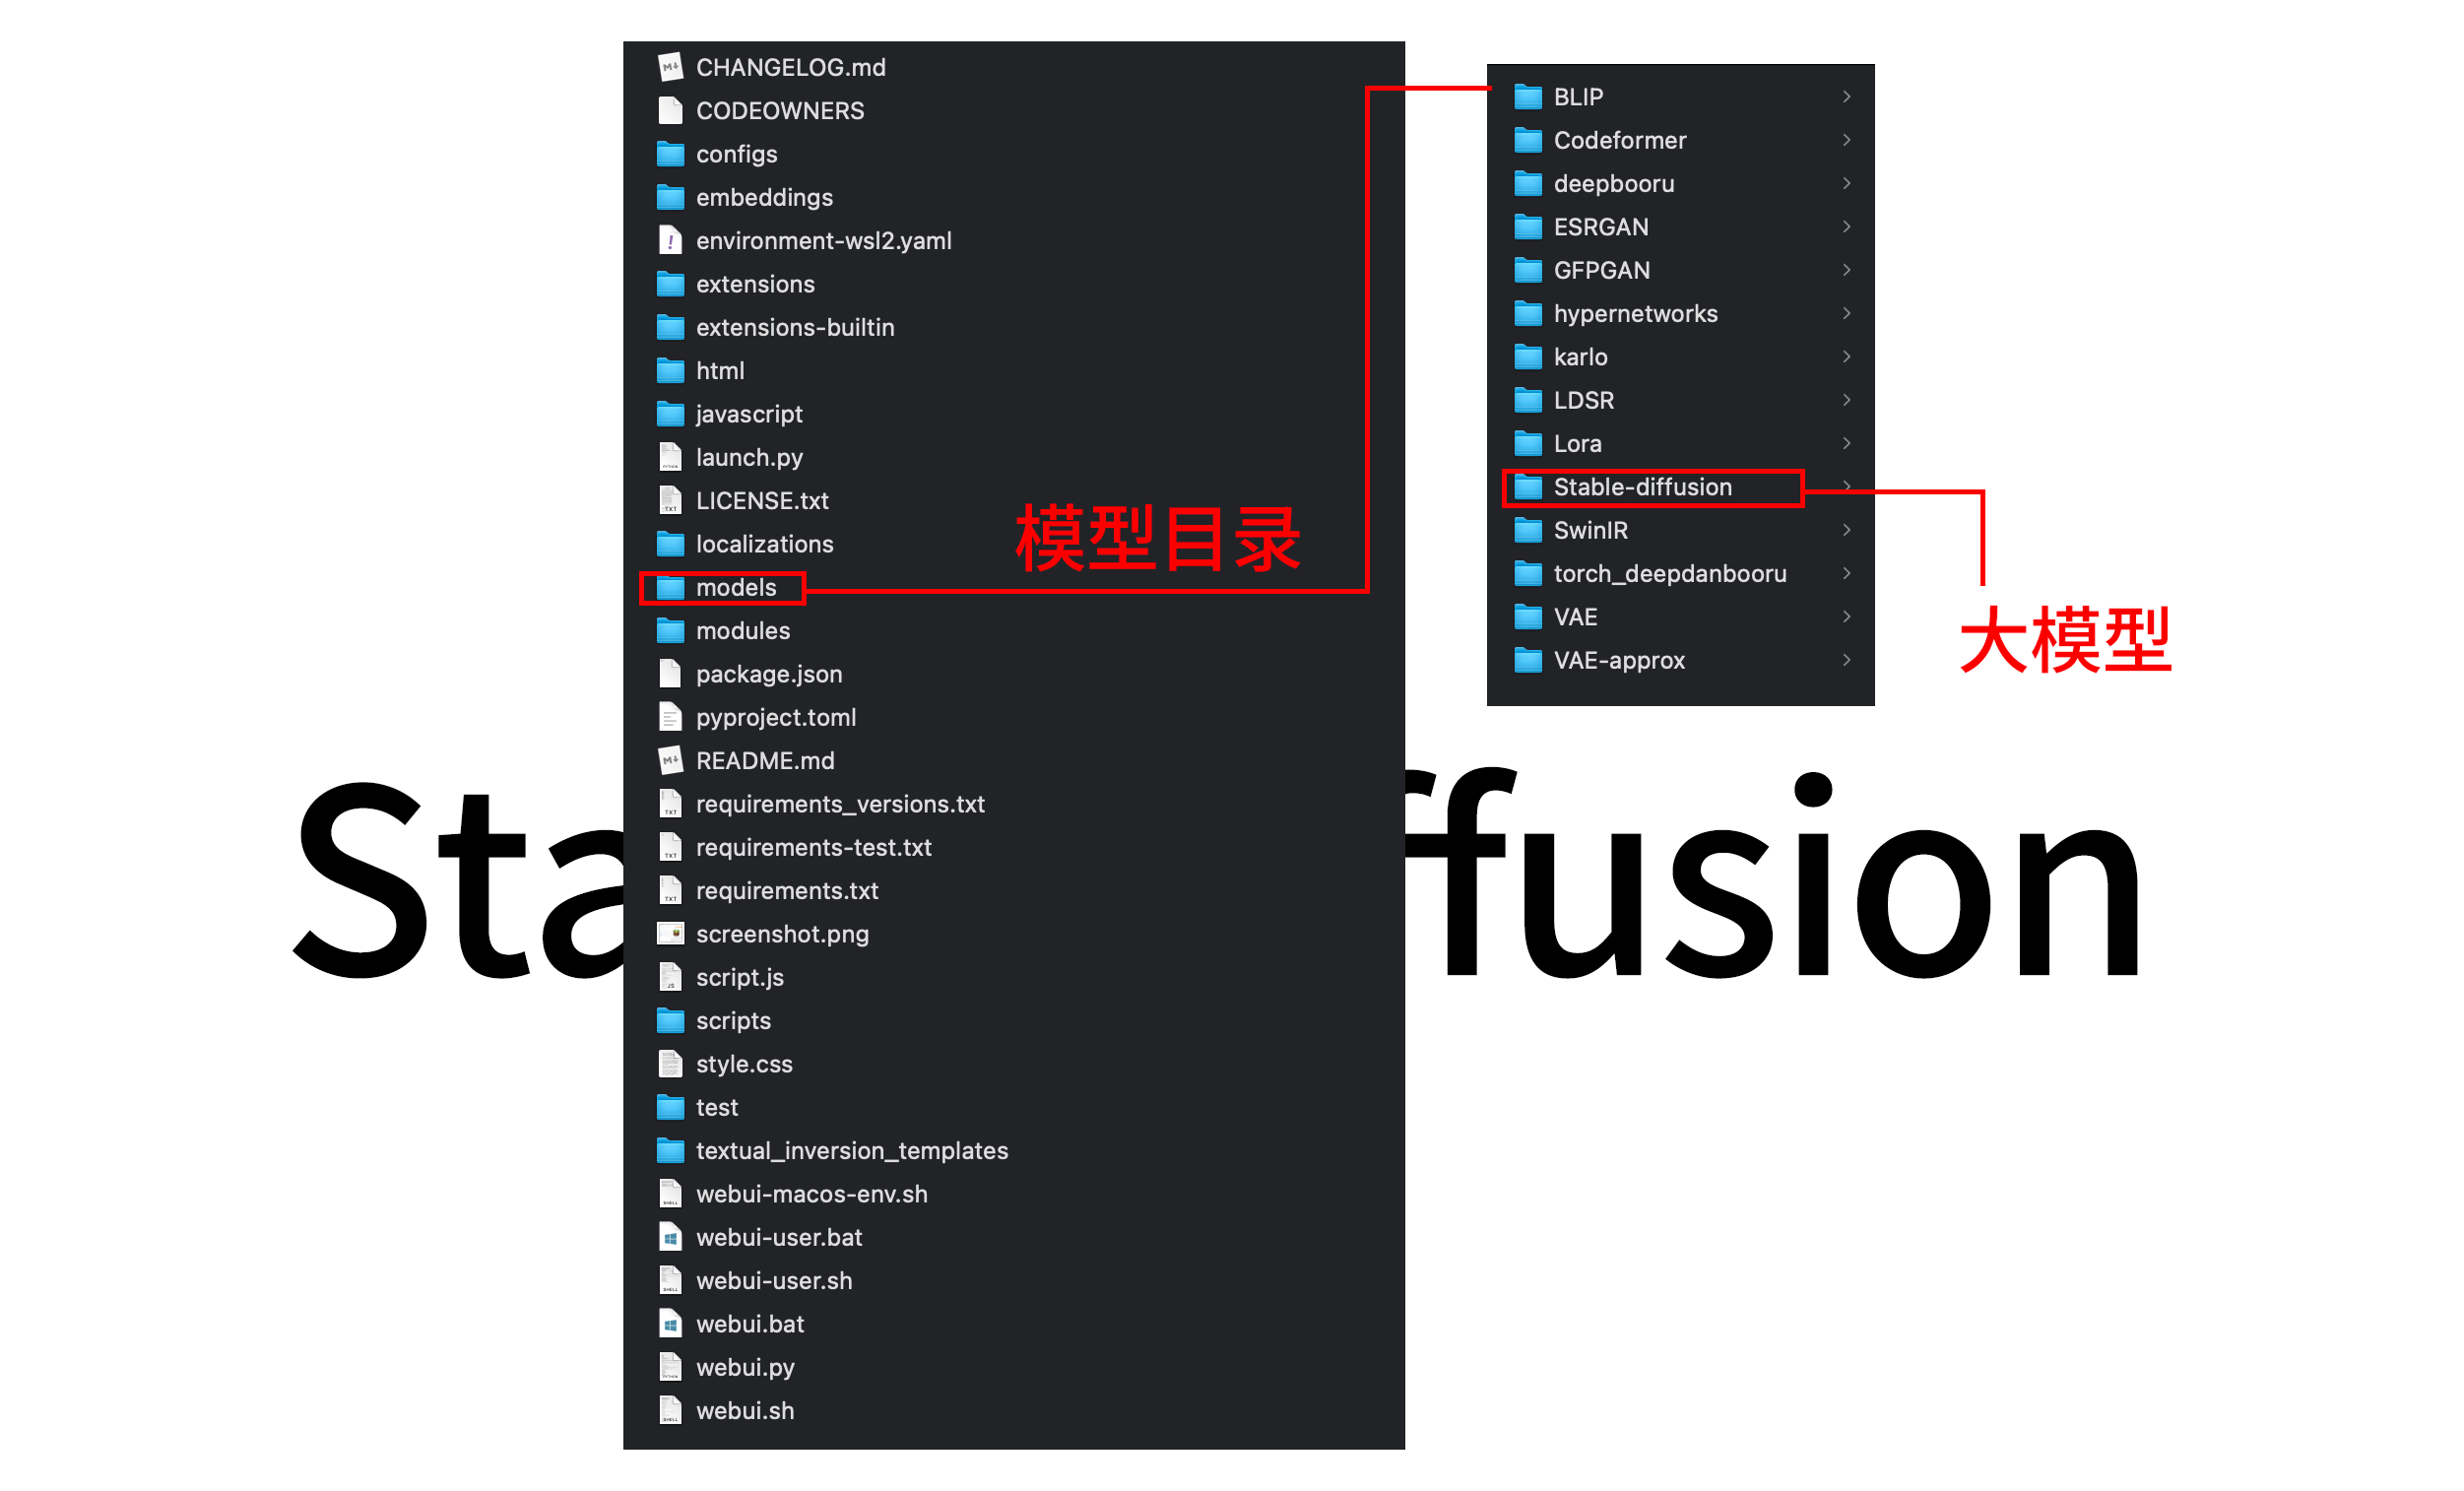 Stable Diffusion webUI 目录结构.png